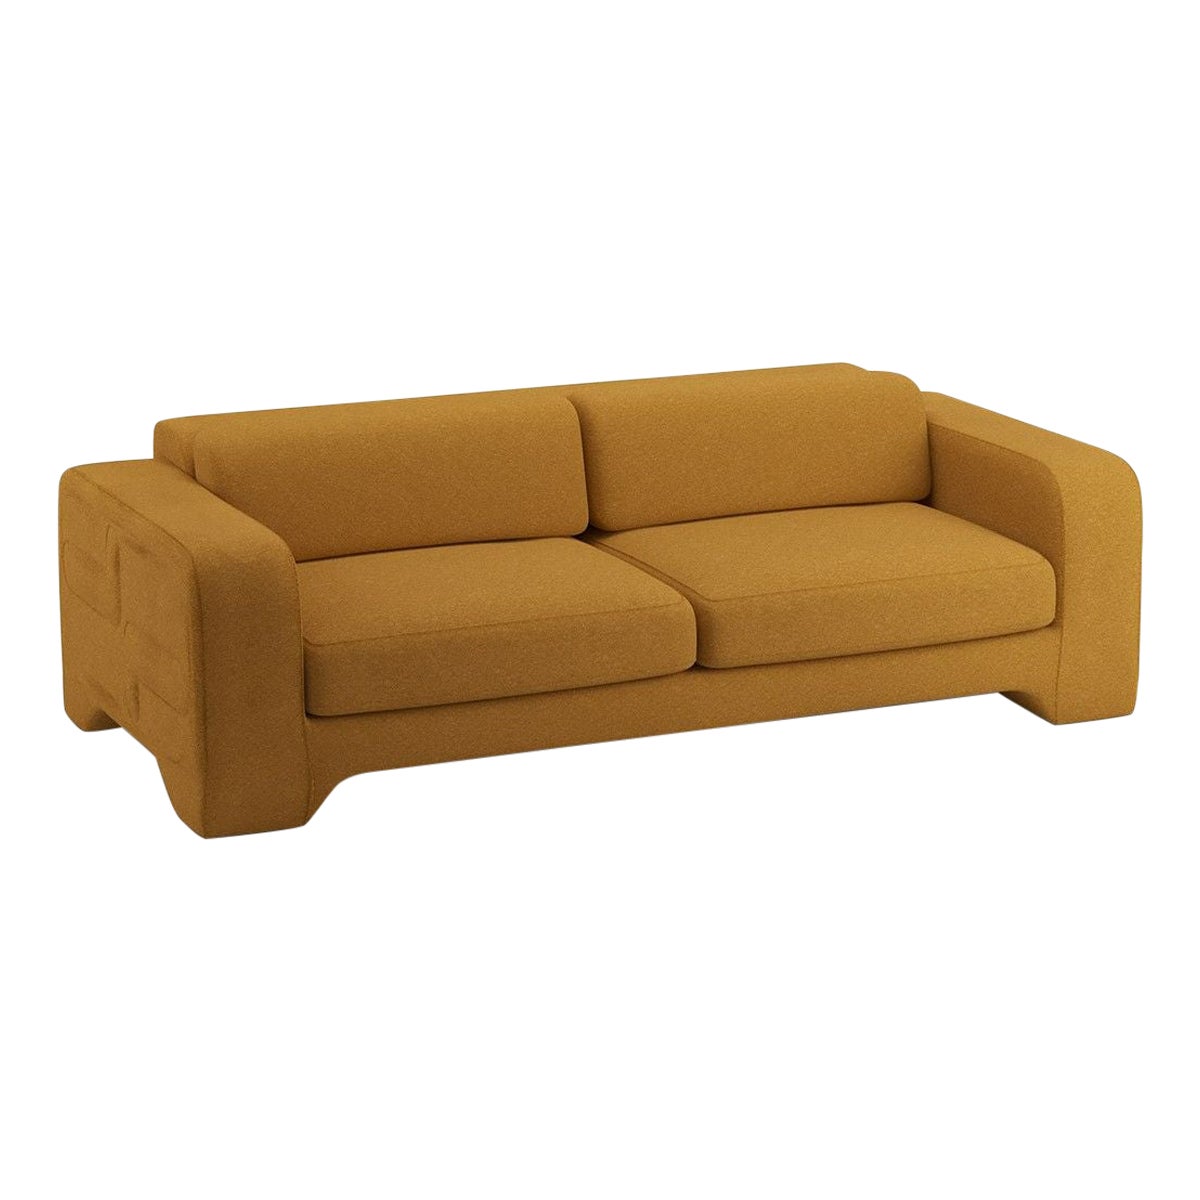 Popus Editions Giovanna 4 Seater Sofa in Curry Cork Linen Upholstery For Sale